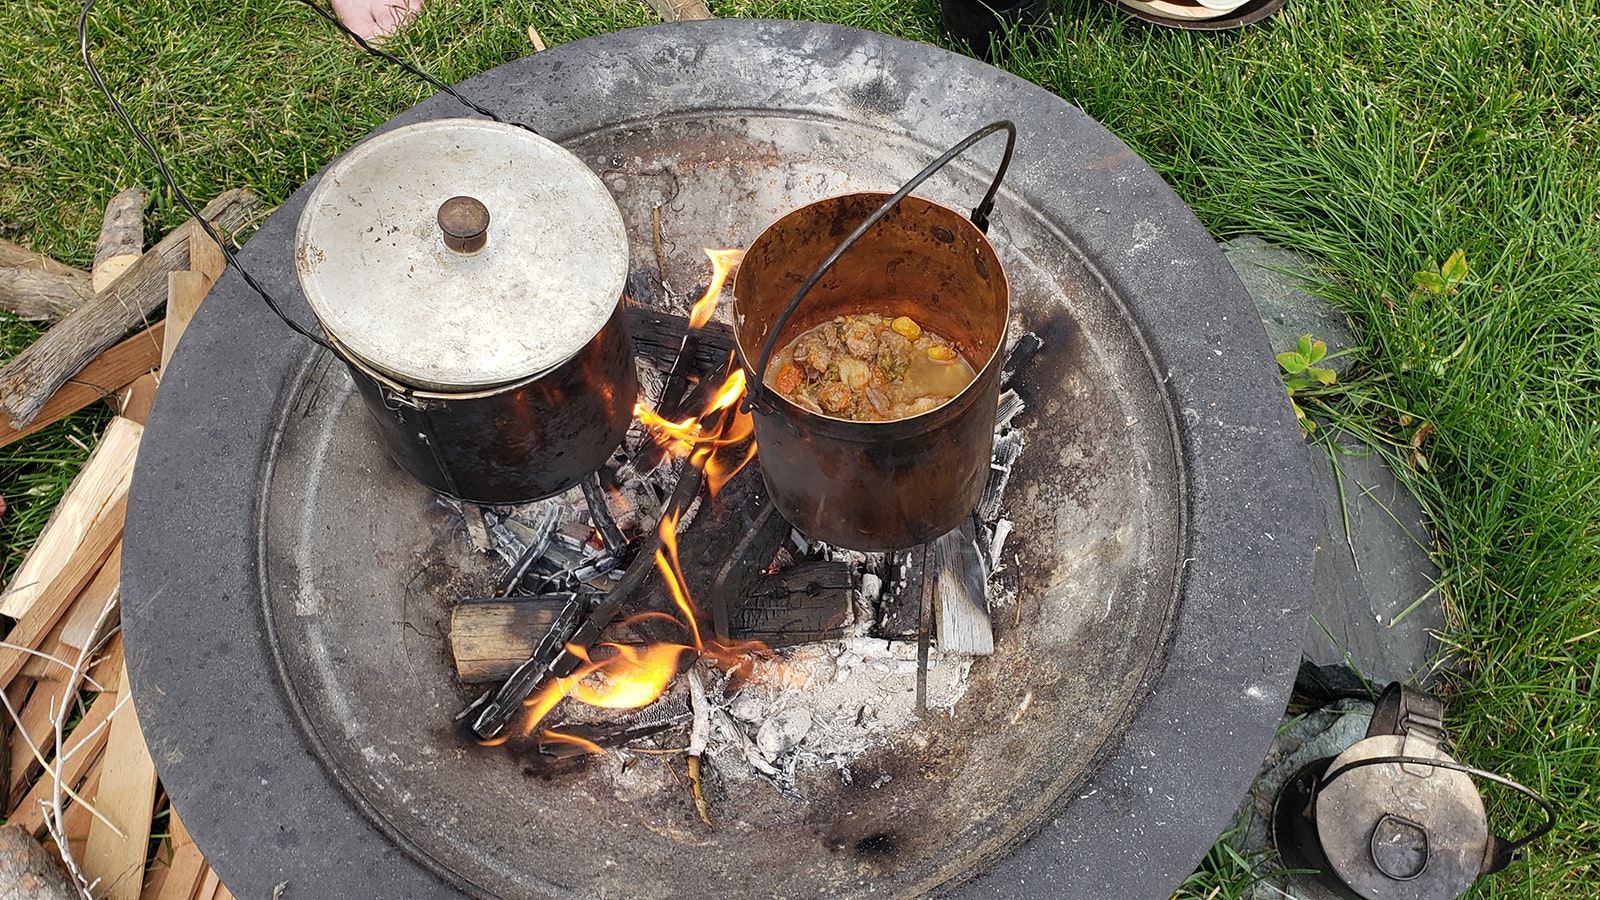 Two pots of venison stew cook over an open campfire during the Green River Rendezvous in Pinedale, Wyoming.